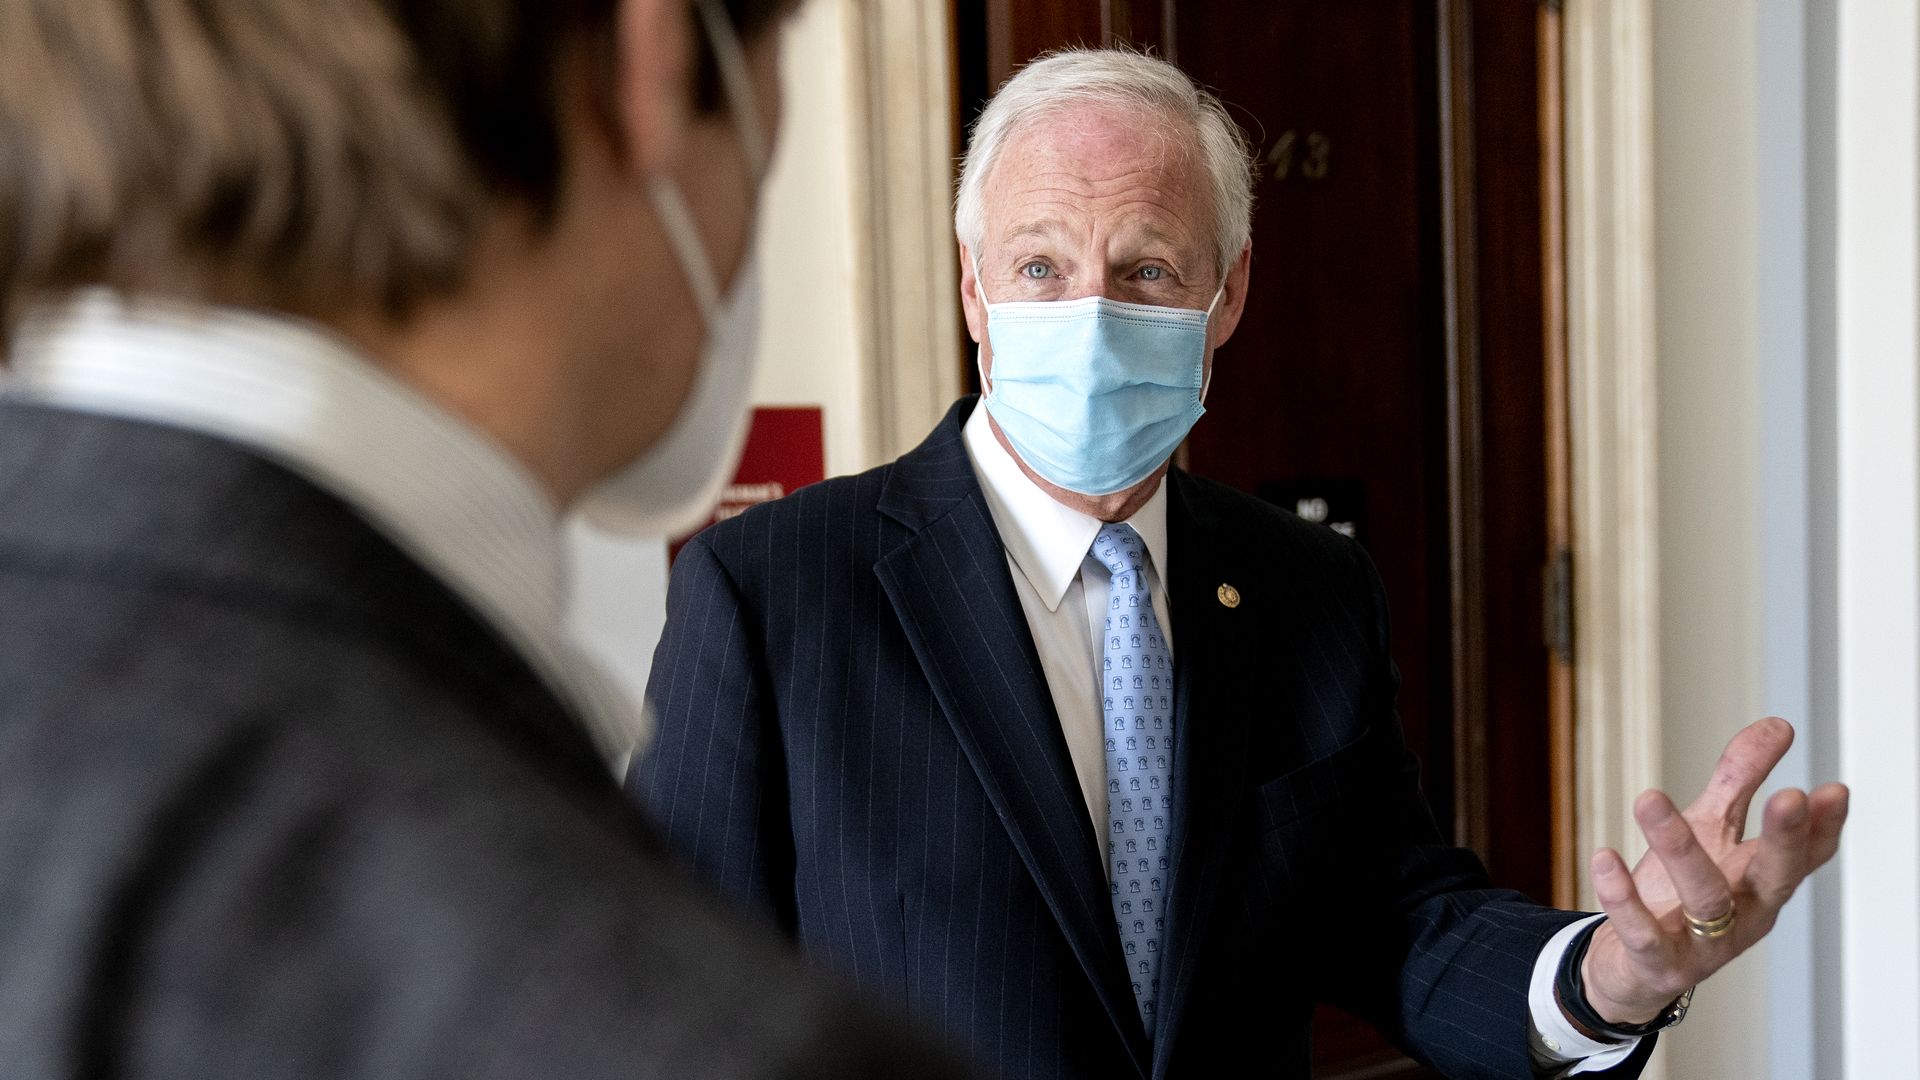 Sen. Ron Johnson speaking in the Russell Senate Office Building in Washington, D.C., on March 4.